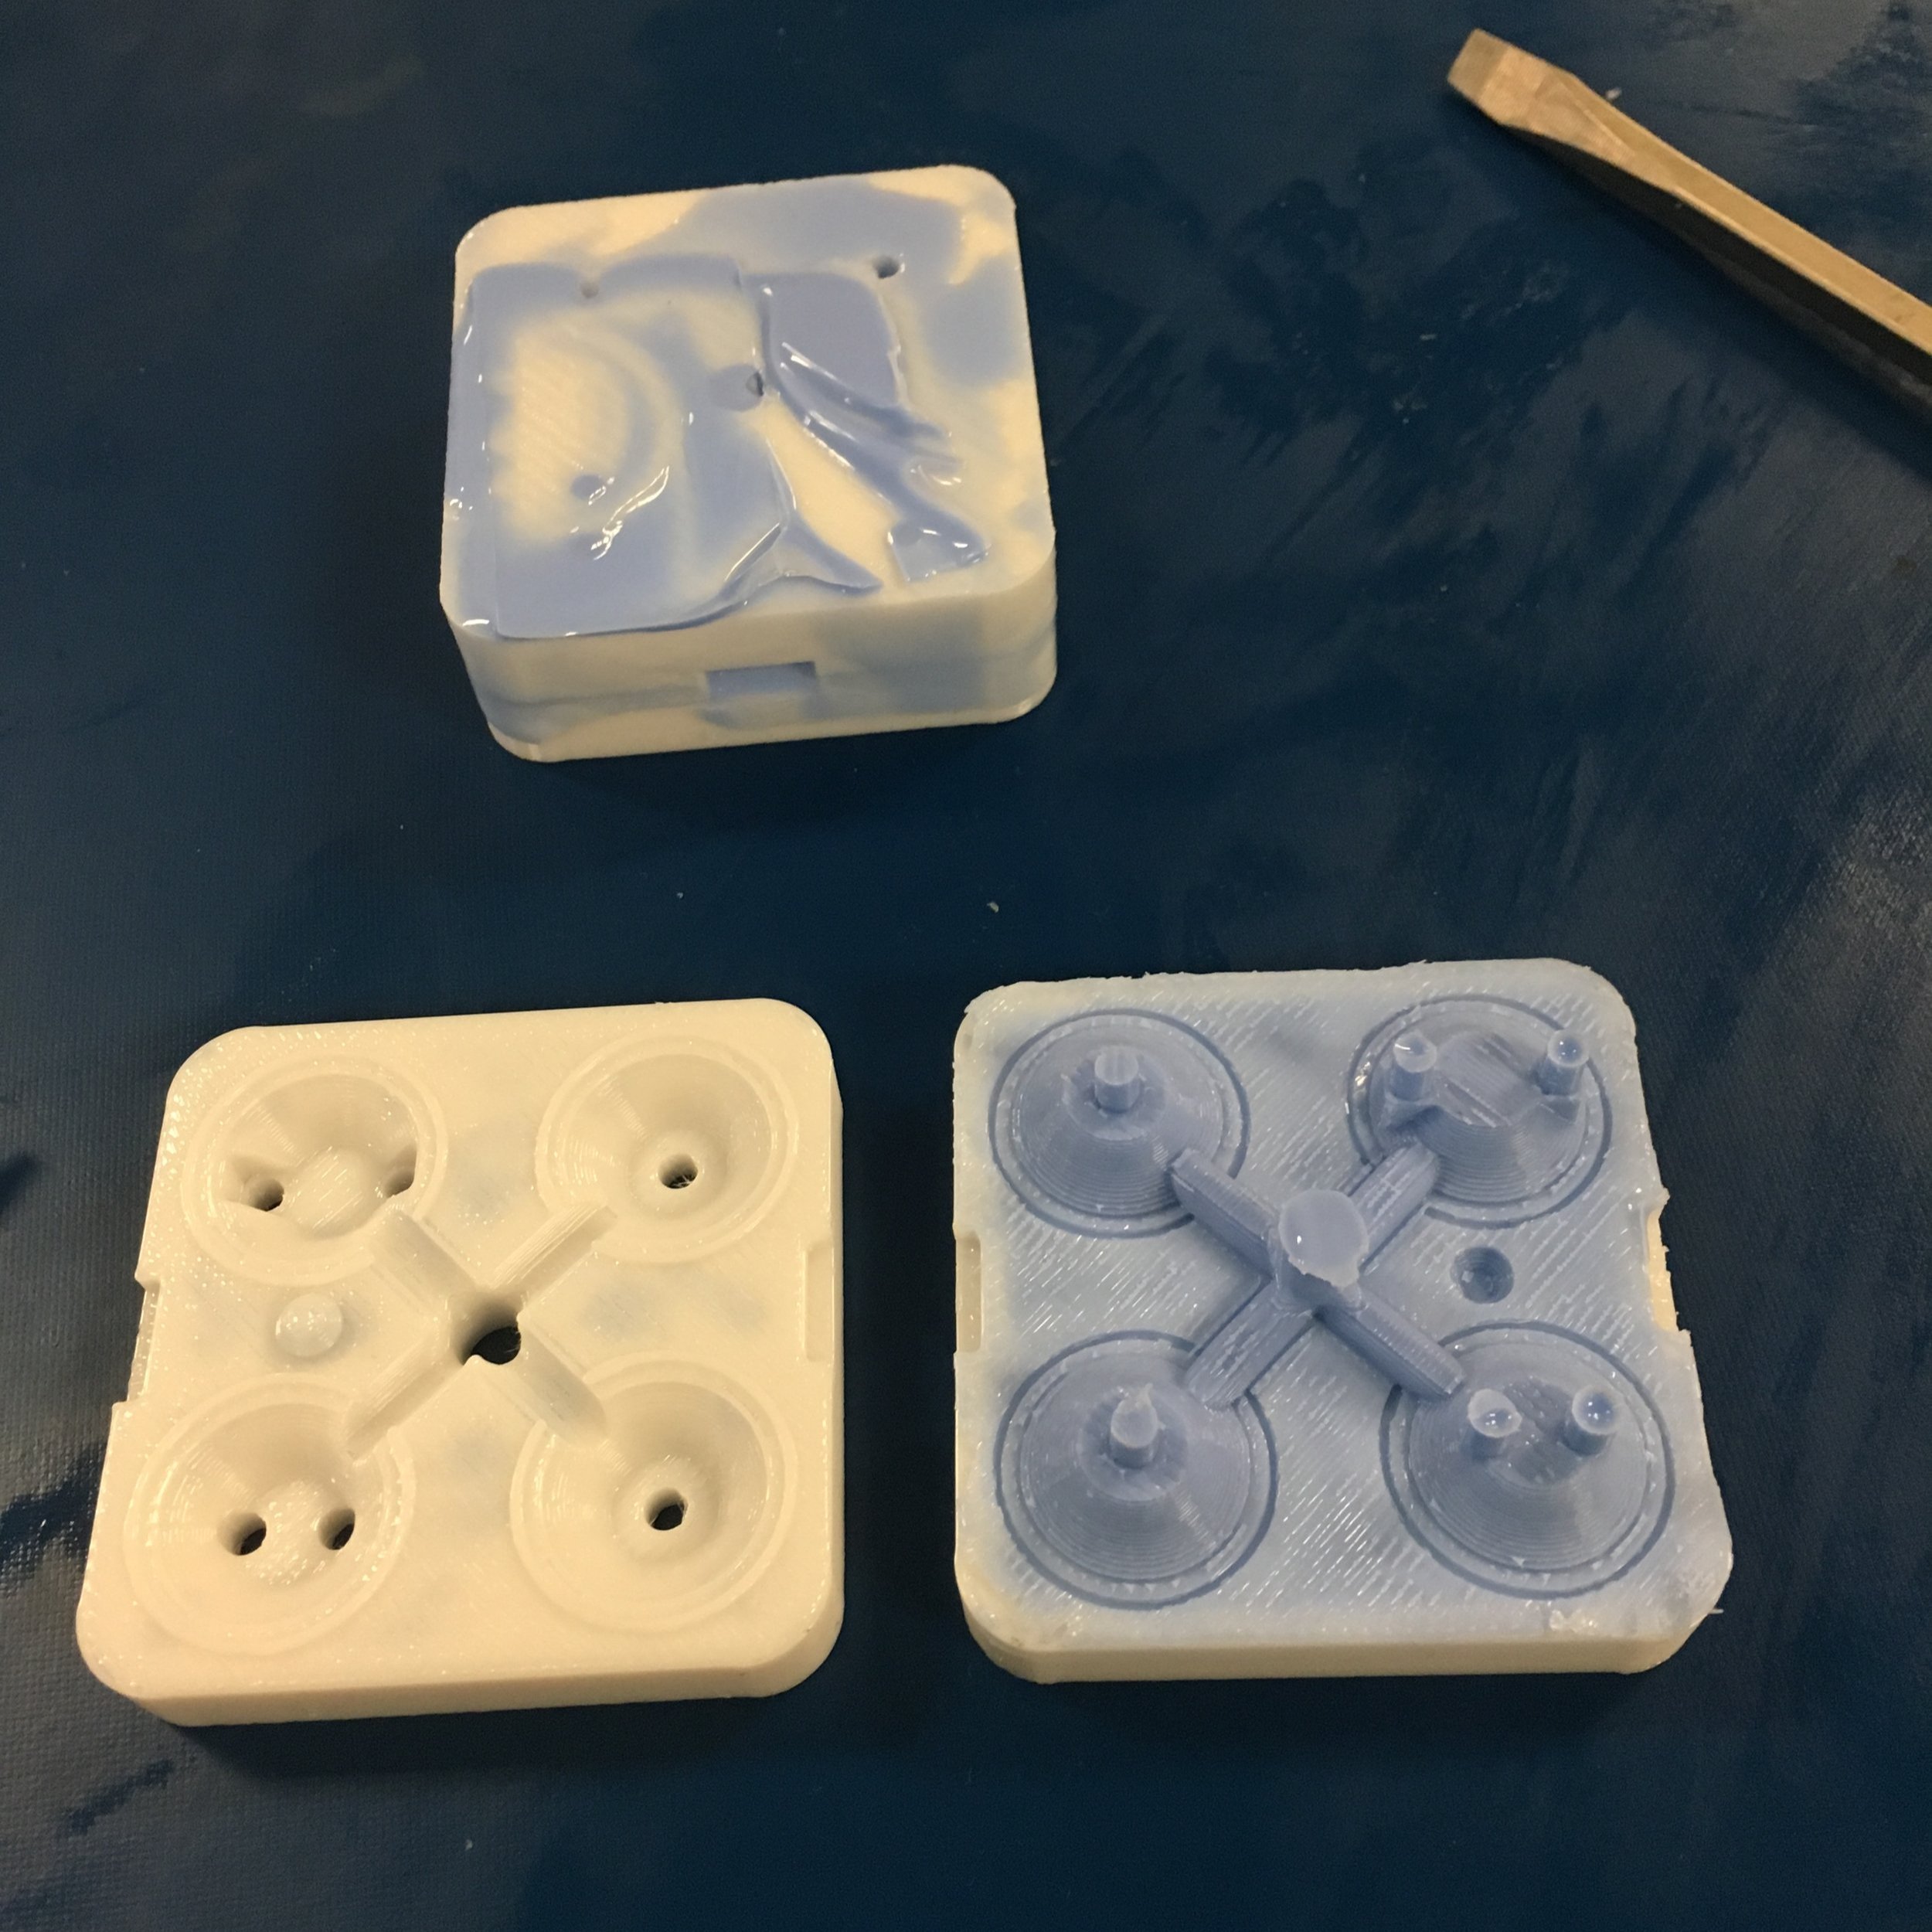 Device #3, multiple molds